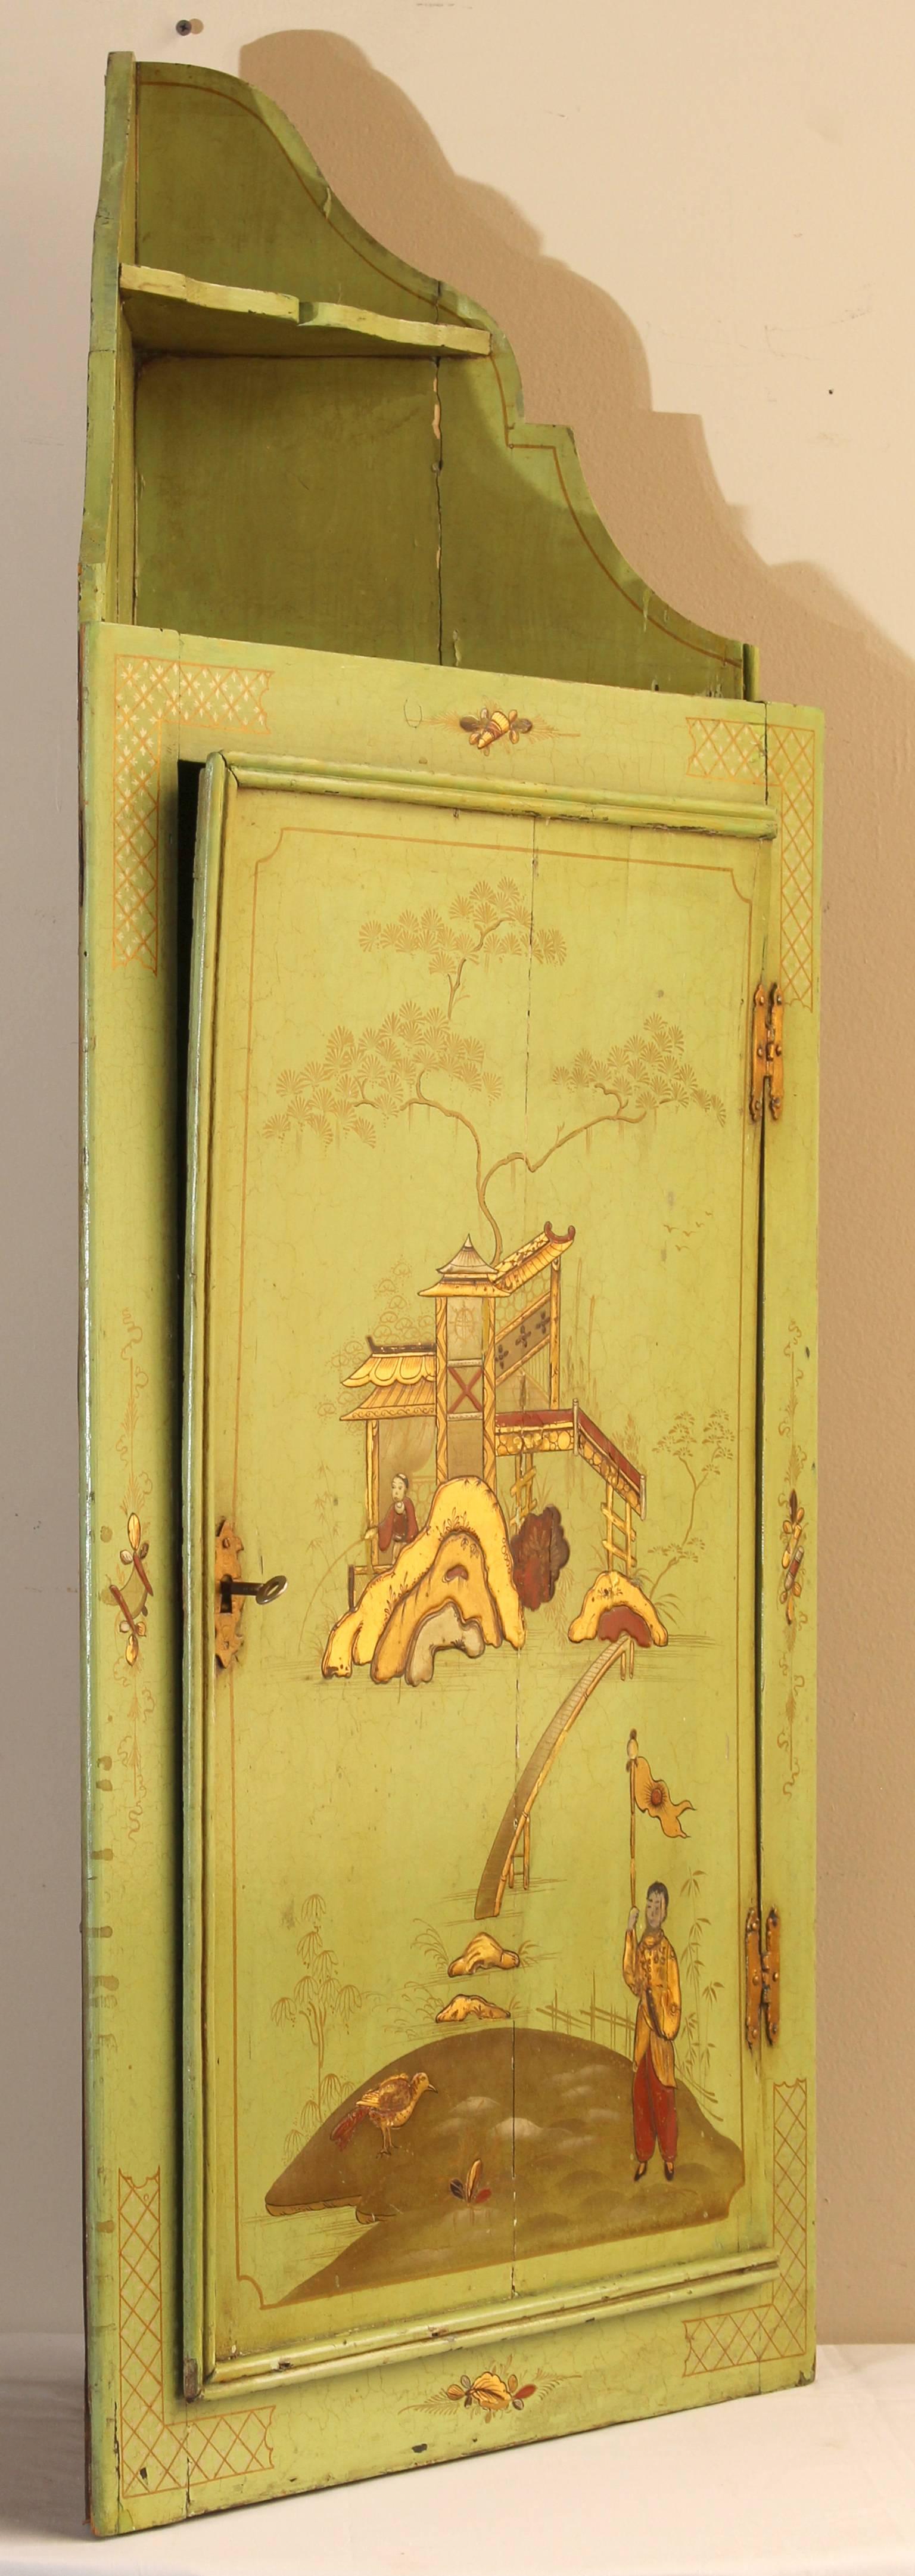 A very charming and unusual apple green chinoiserie decorated mid-19th C English hanging corner cupboard. 